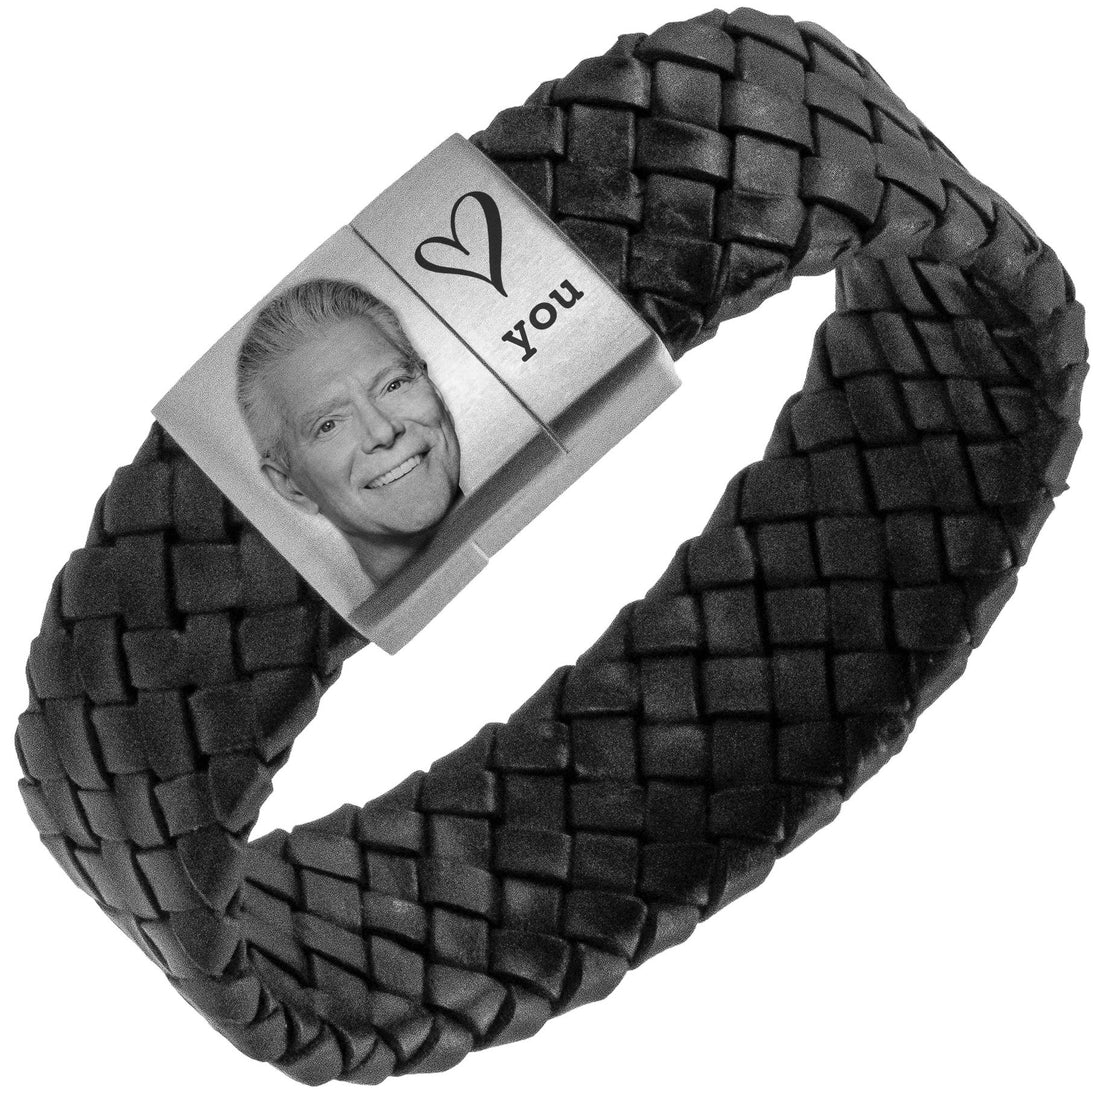 Photo bracelet with your own image - Braided leather bracelet with photo engraving